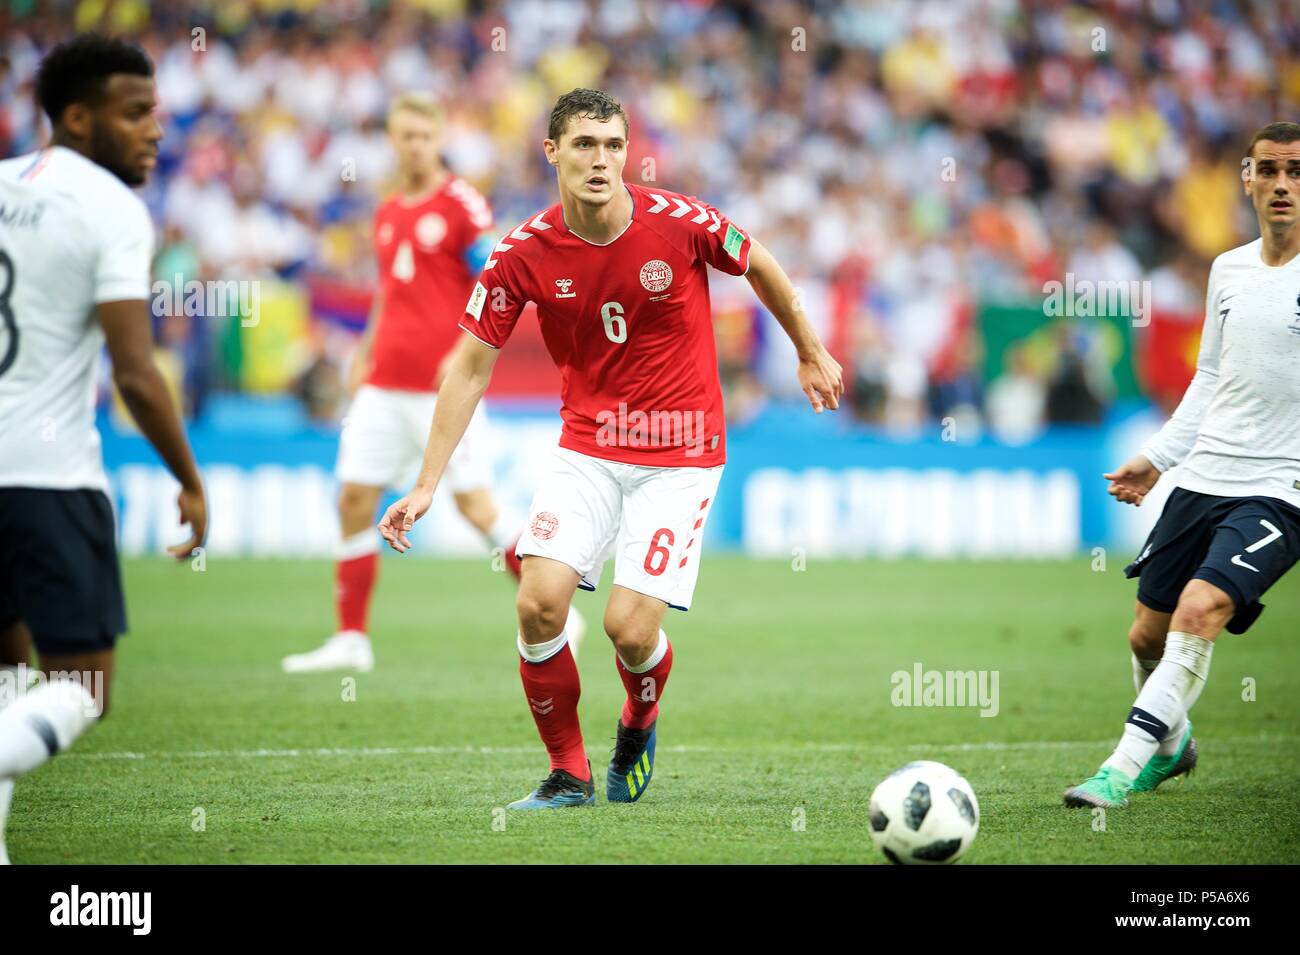 Jun 26th, 2018, Moscow, Russia. Andreas Christensen of Denmark and  Antoine Griezmann(R) of france in action during the 2018 FIFA World Cup Russia Group C match Denmark v  France at Luzhniki  stadium, Moscow. Shoja Lak/Alamy Live News Stock Photo